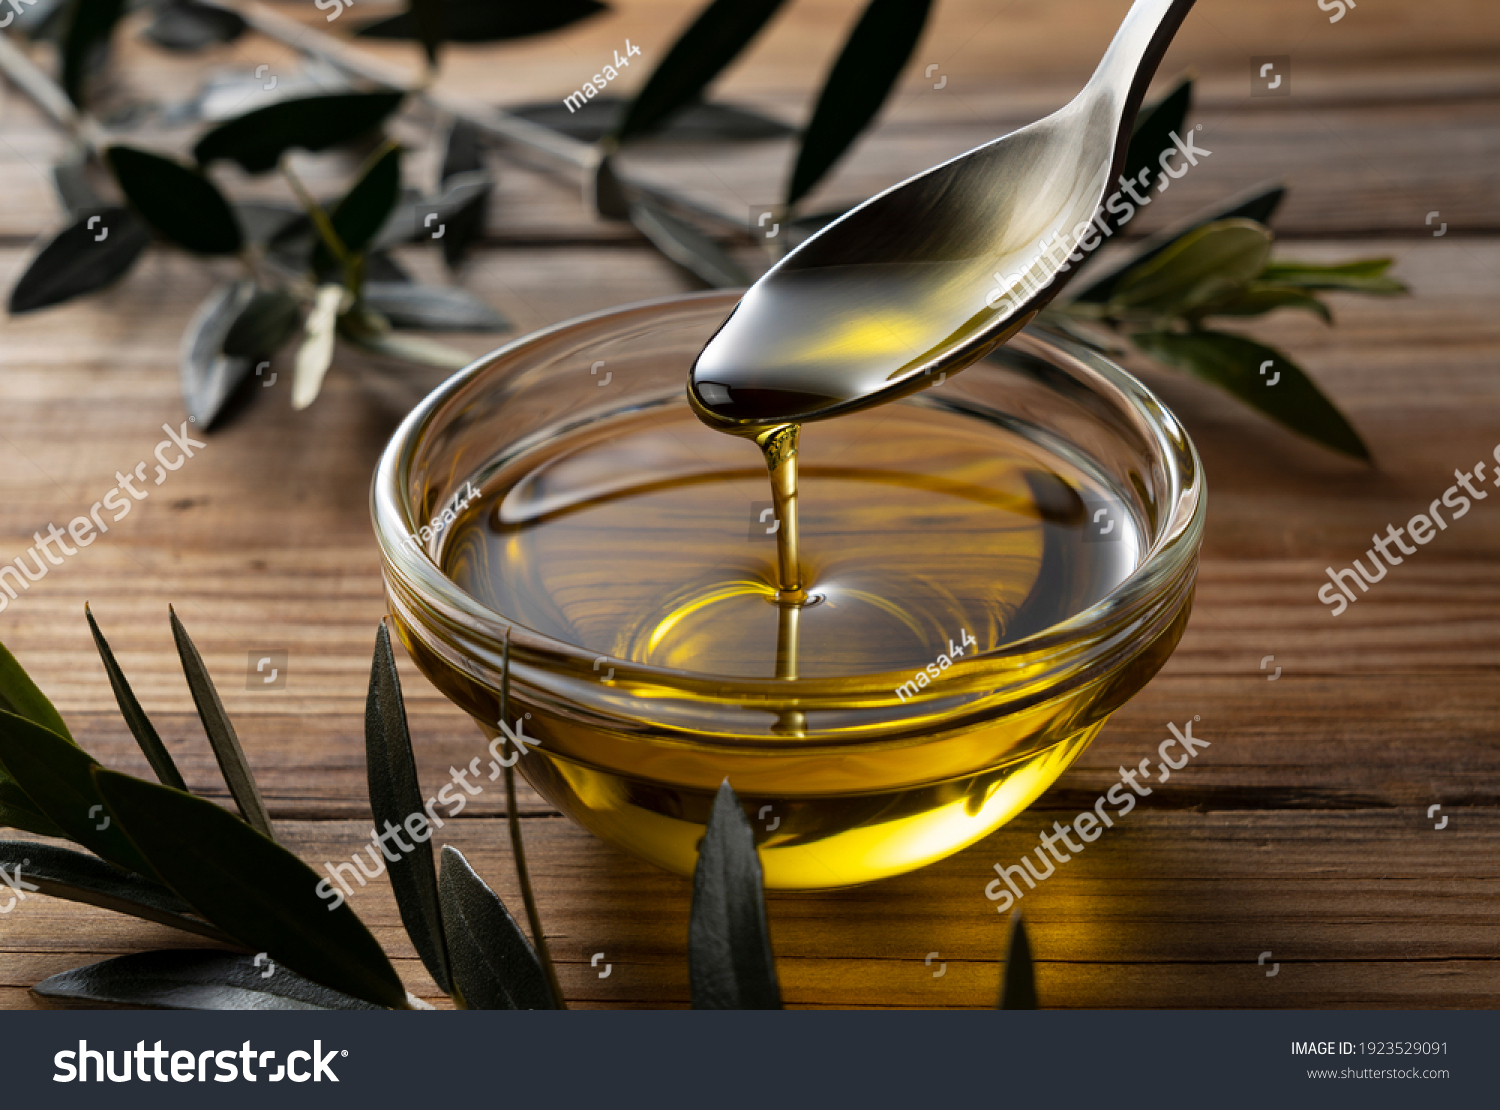 Spooning olive oil into a bowl placed on a wooden background #1923529091